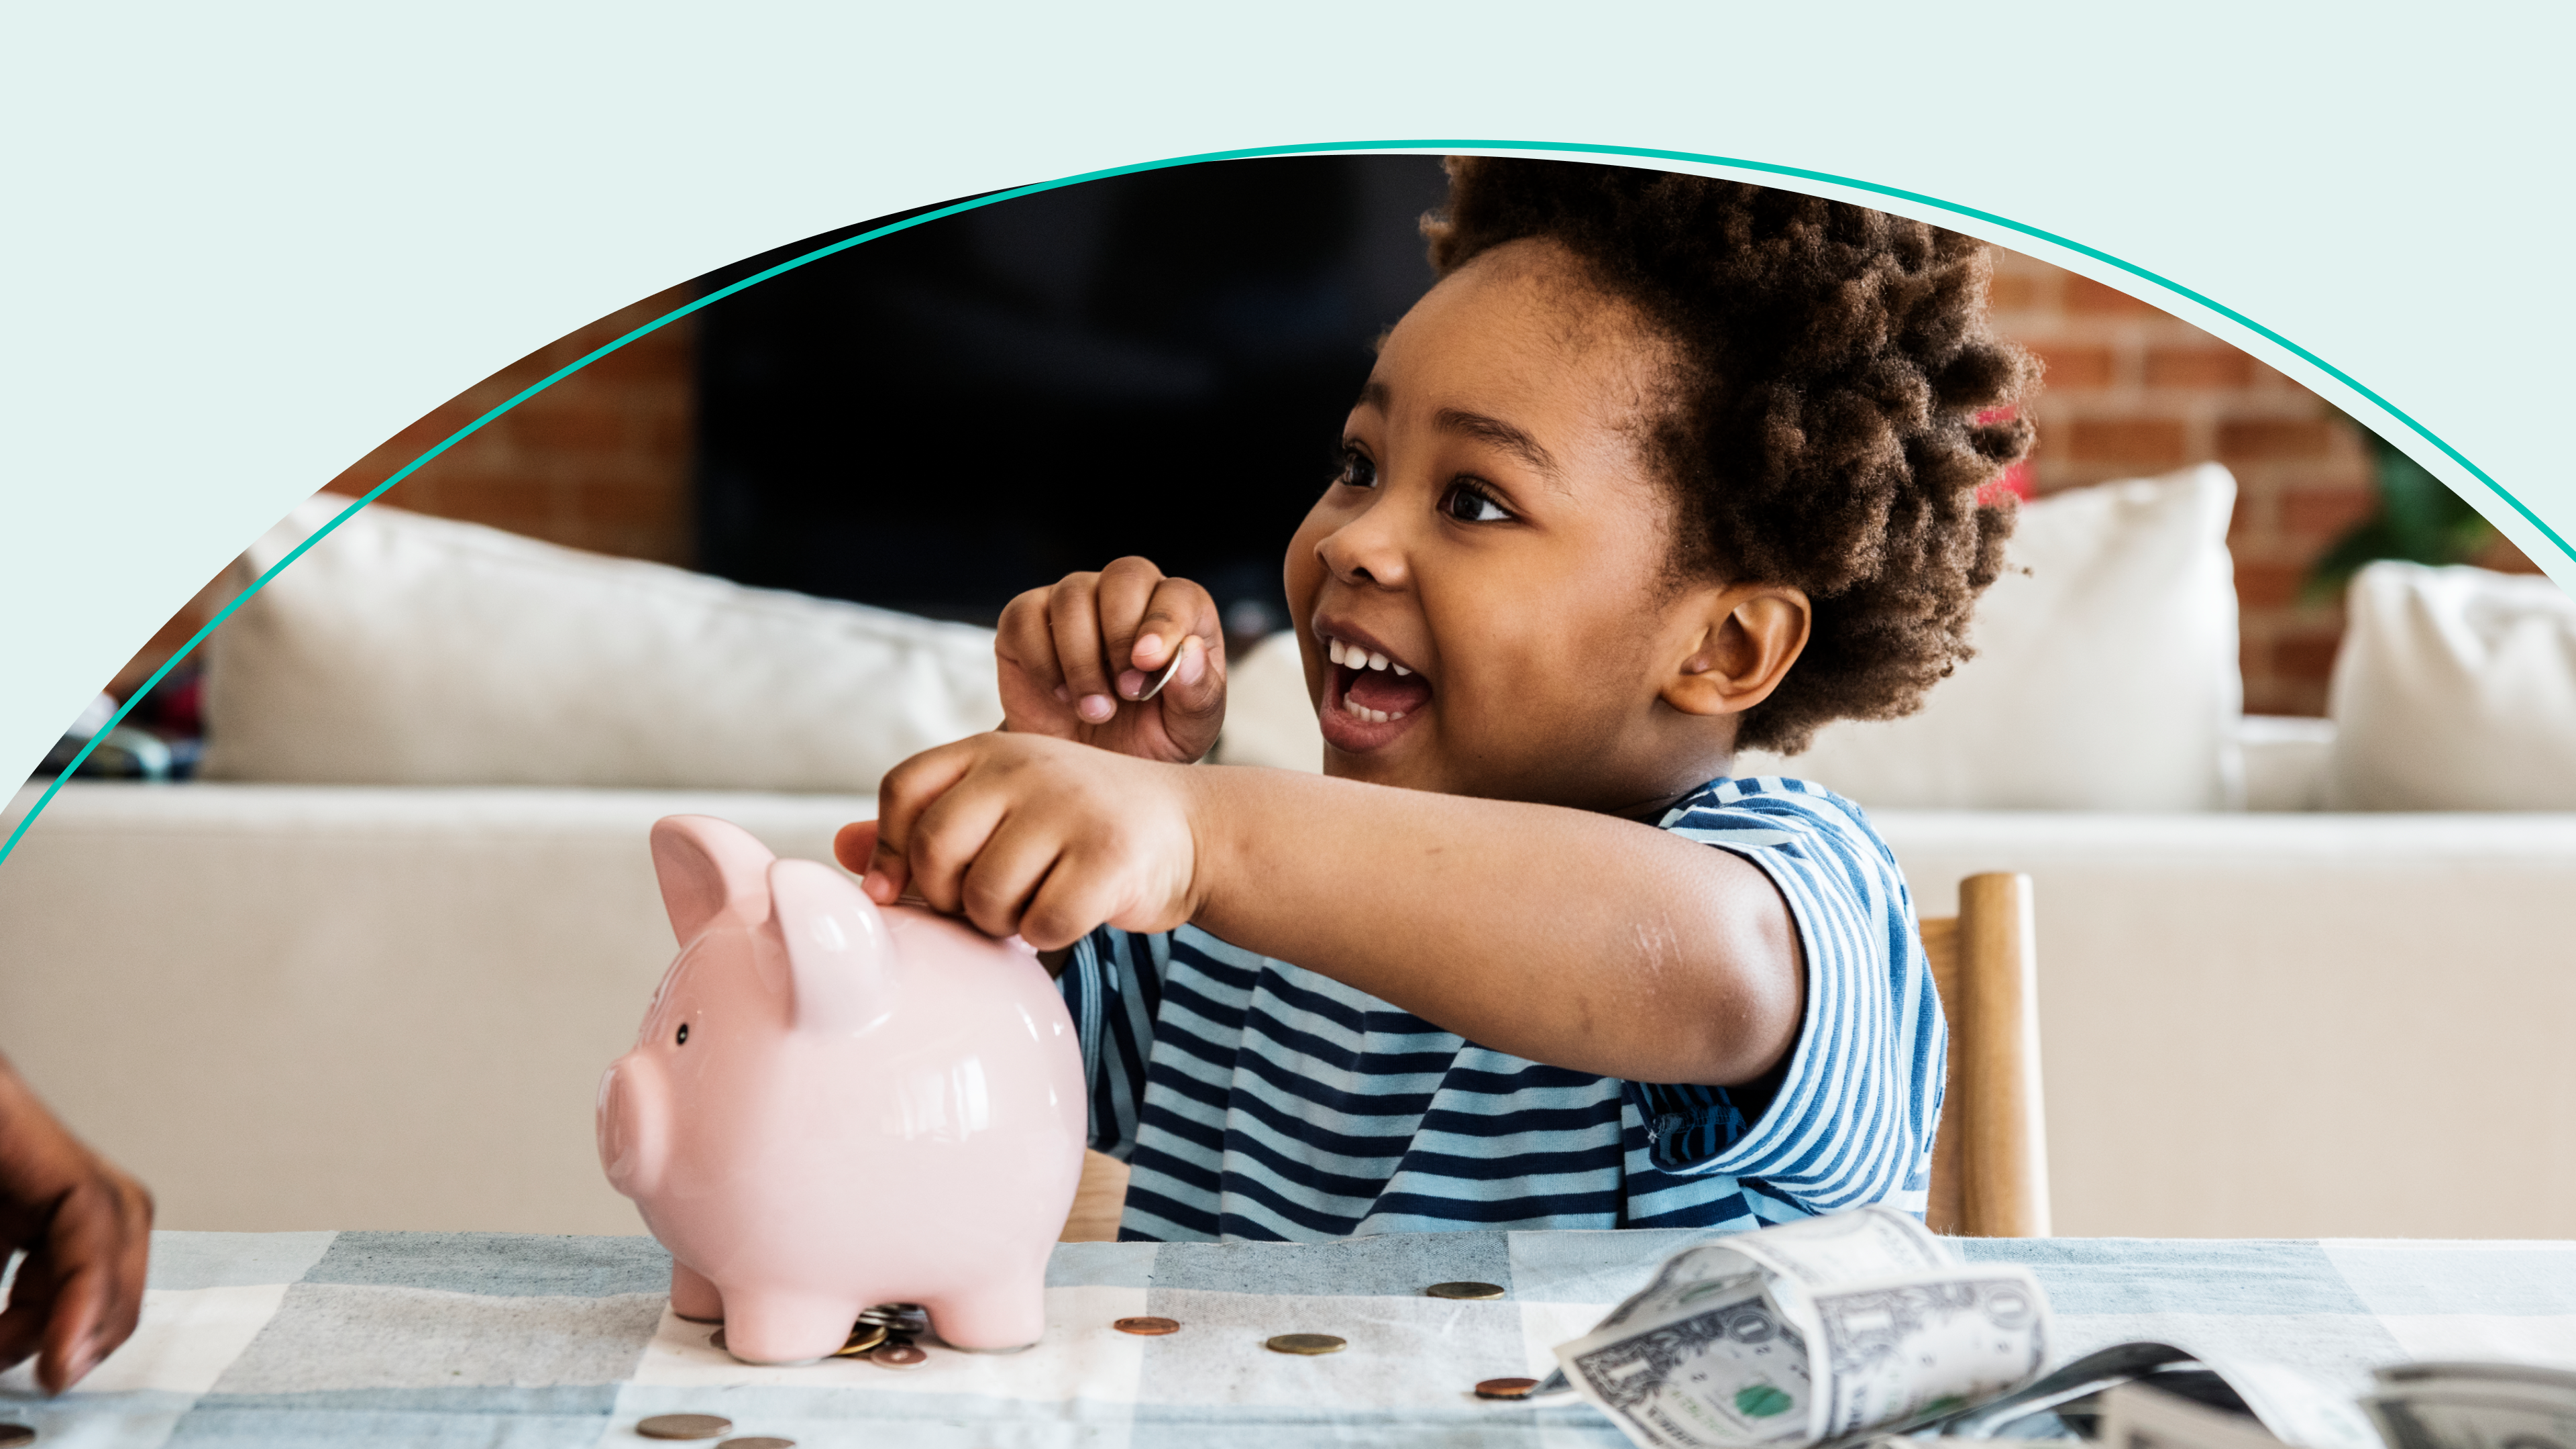 accessibility, A child putting money into a piggy bank